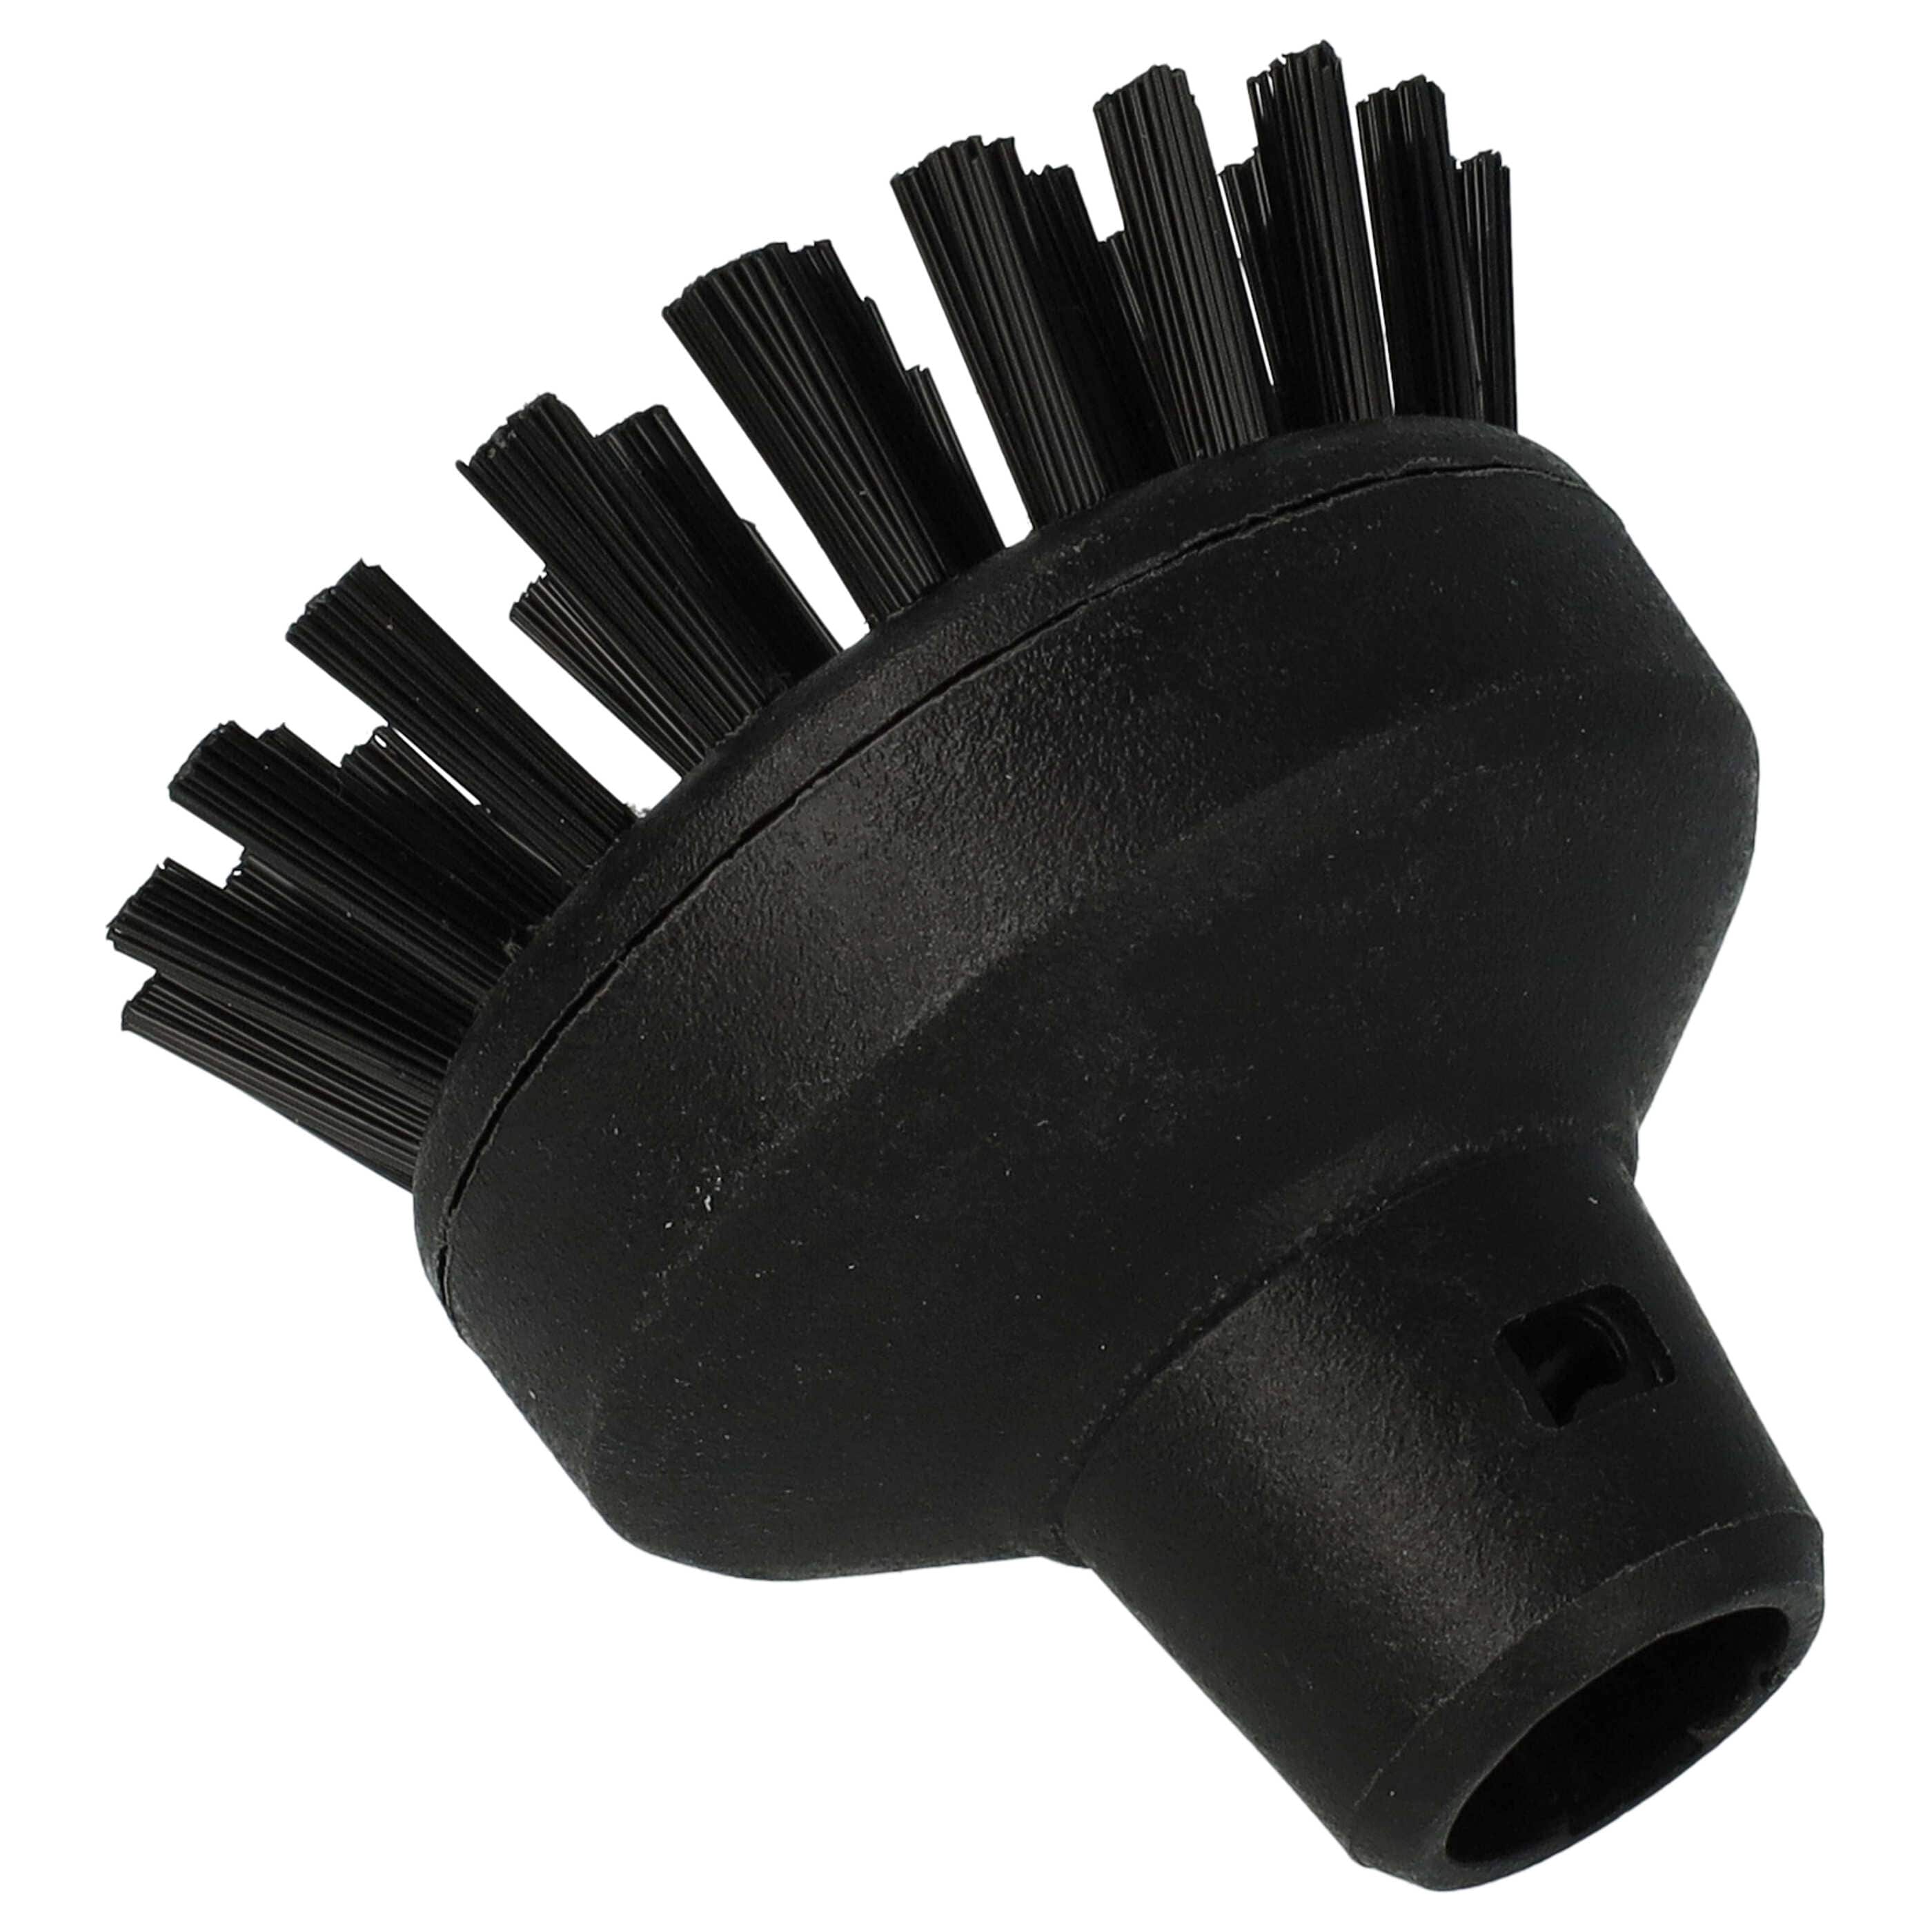 Round Brush as Replacement for Kärcher 2.863-022.0 for Kärcher Steam Cleaner